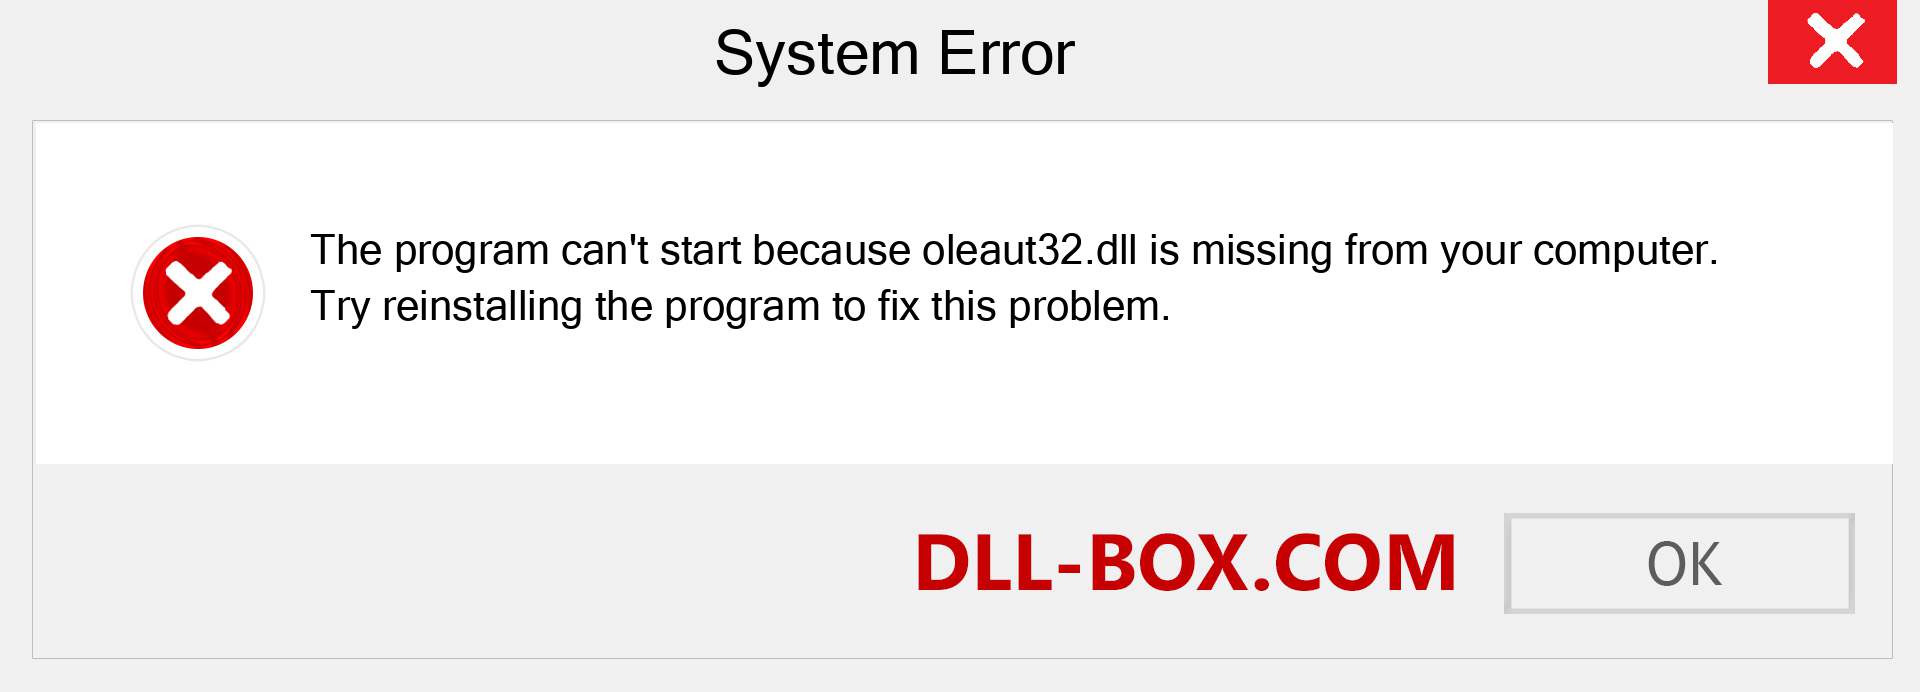  oleaut32.dll file is missing?. Download for Windows 7, 8, 10 - Fix  oleaut32 dll Missing Error on Windows, photos, images